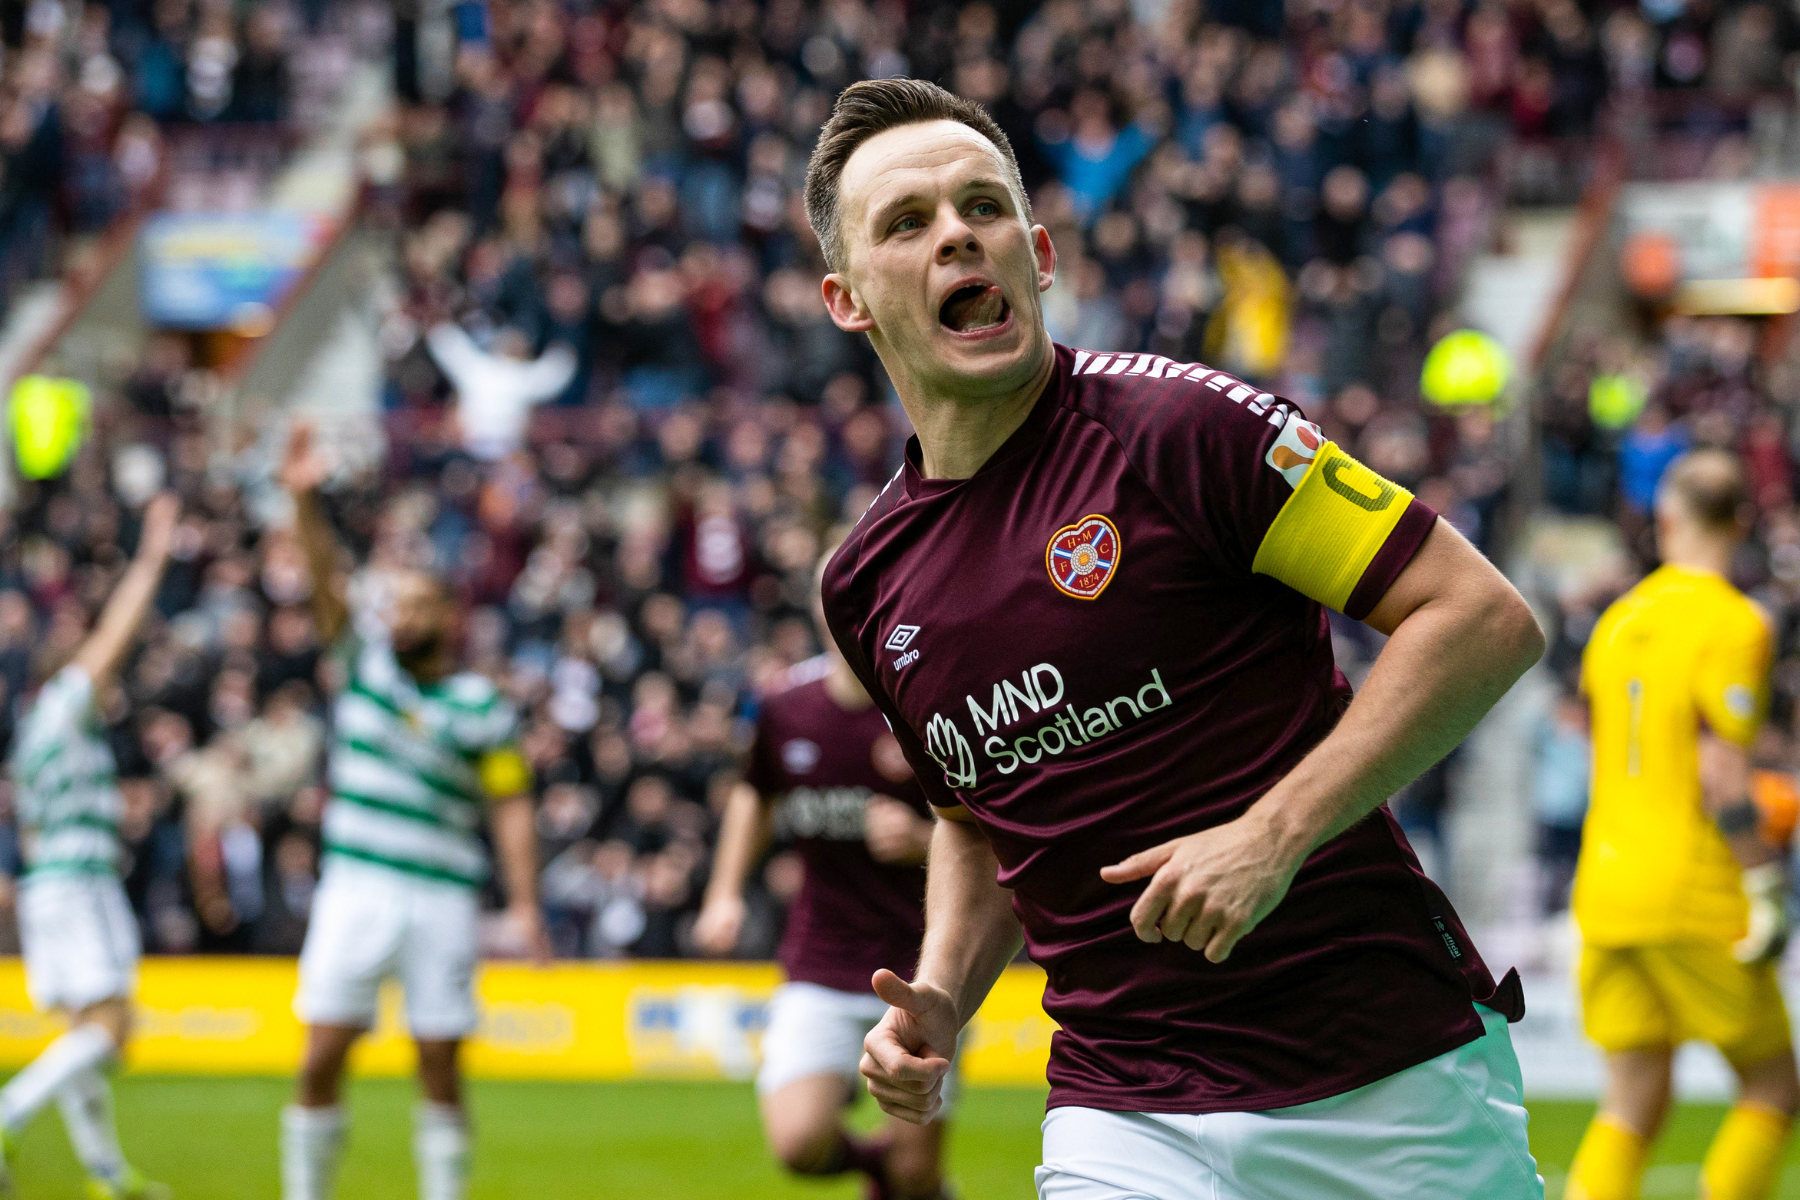 Lawrence Shankland named Player of the Year at PFA awards